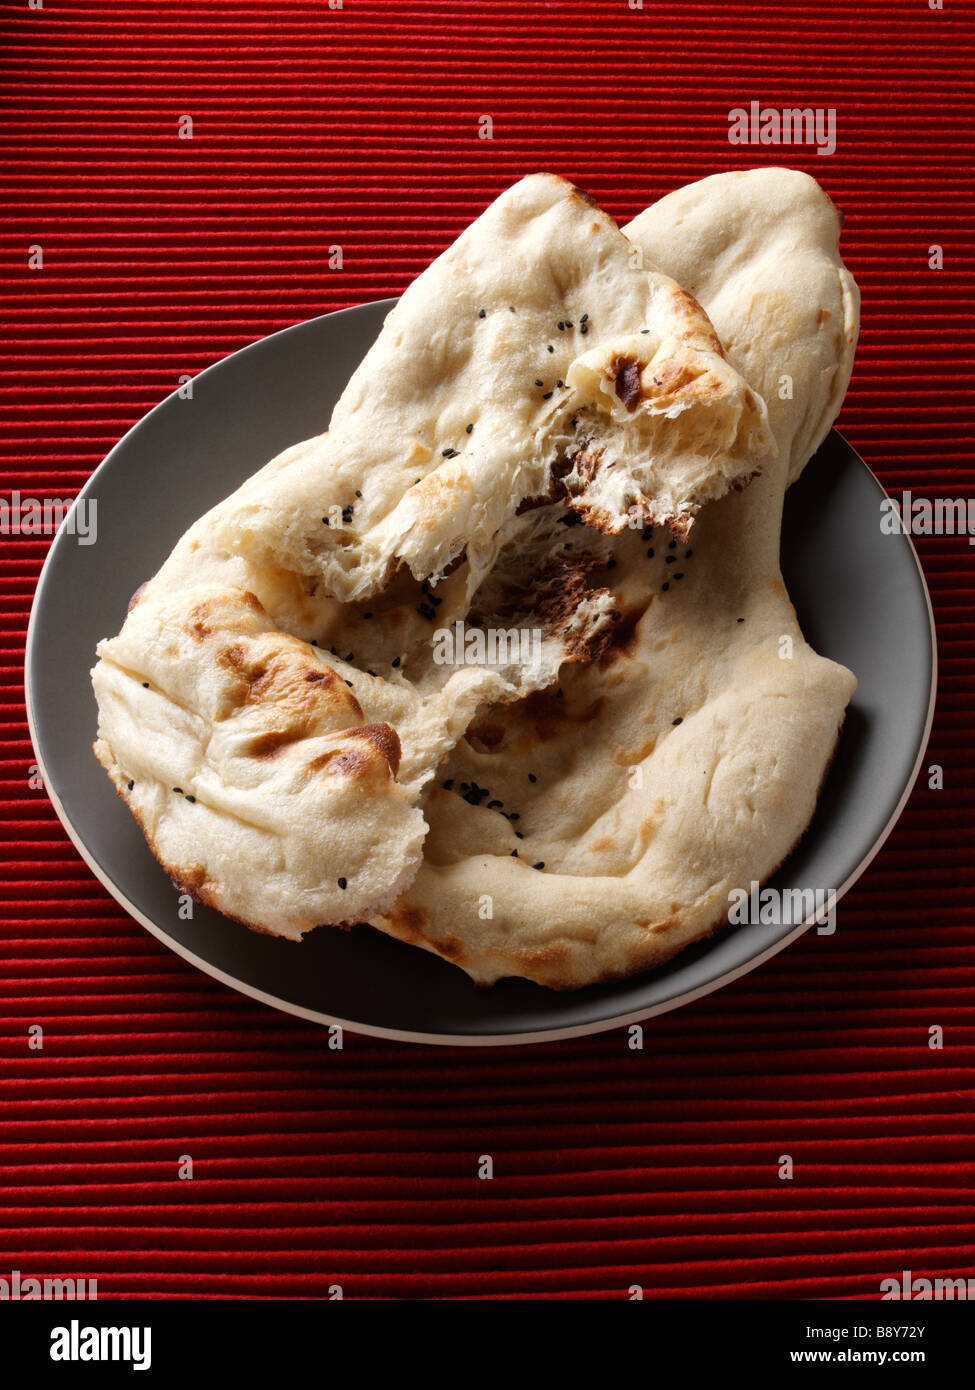 Tandoori Naan In Clay Oven Stock Photo, Picture and Royalty Free Image.  Image 7423928.